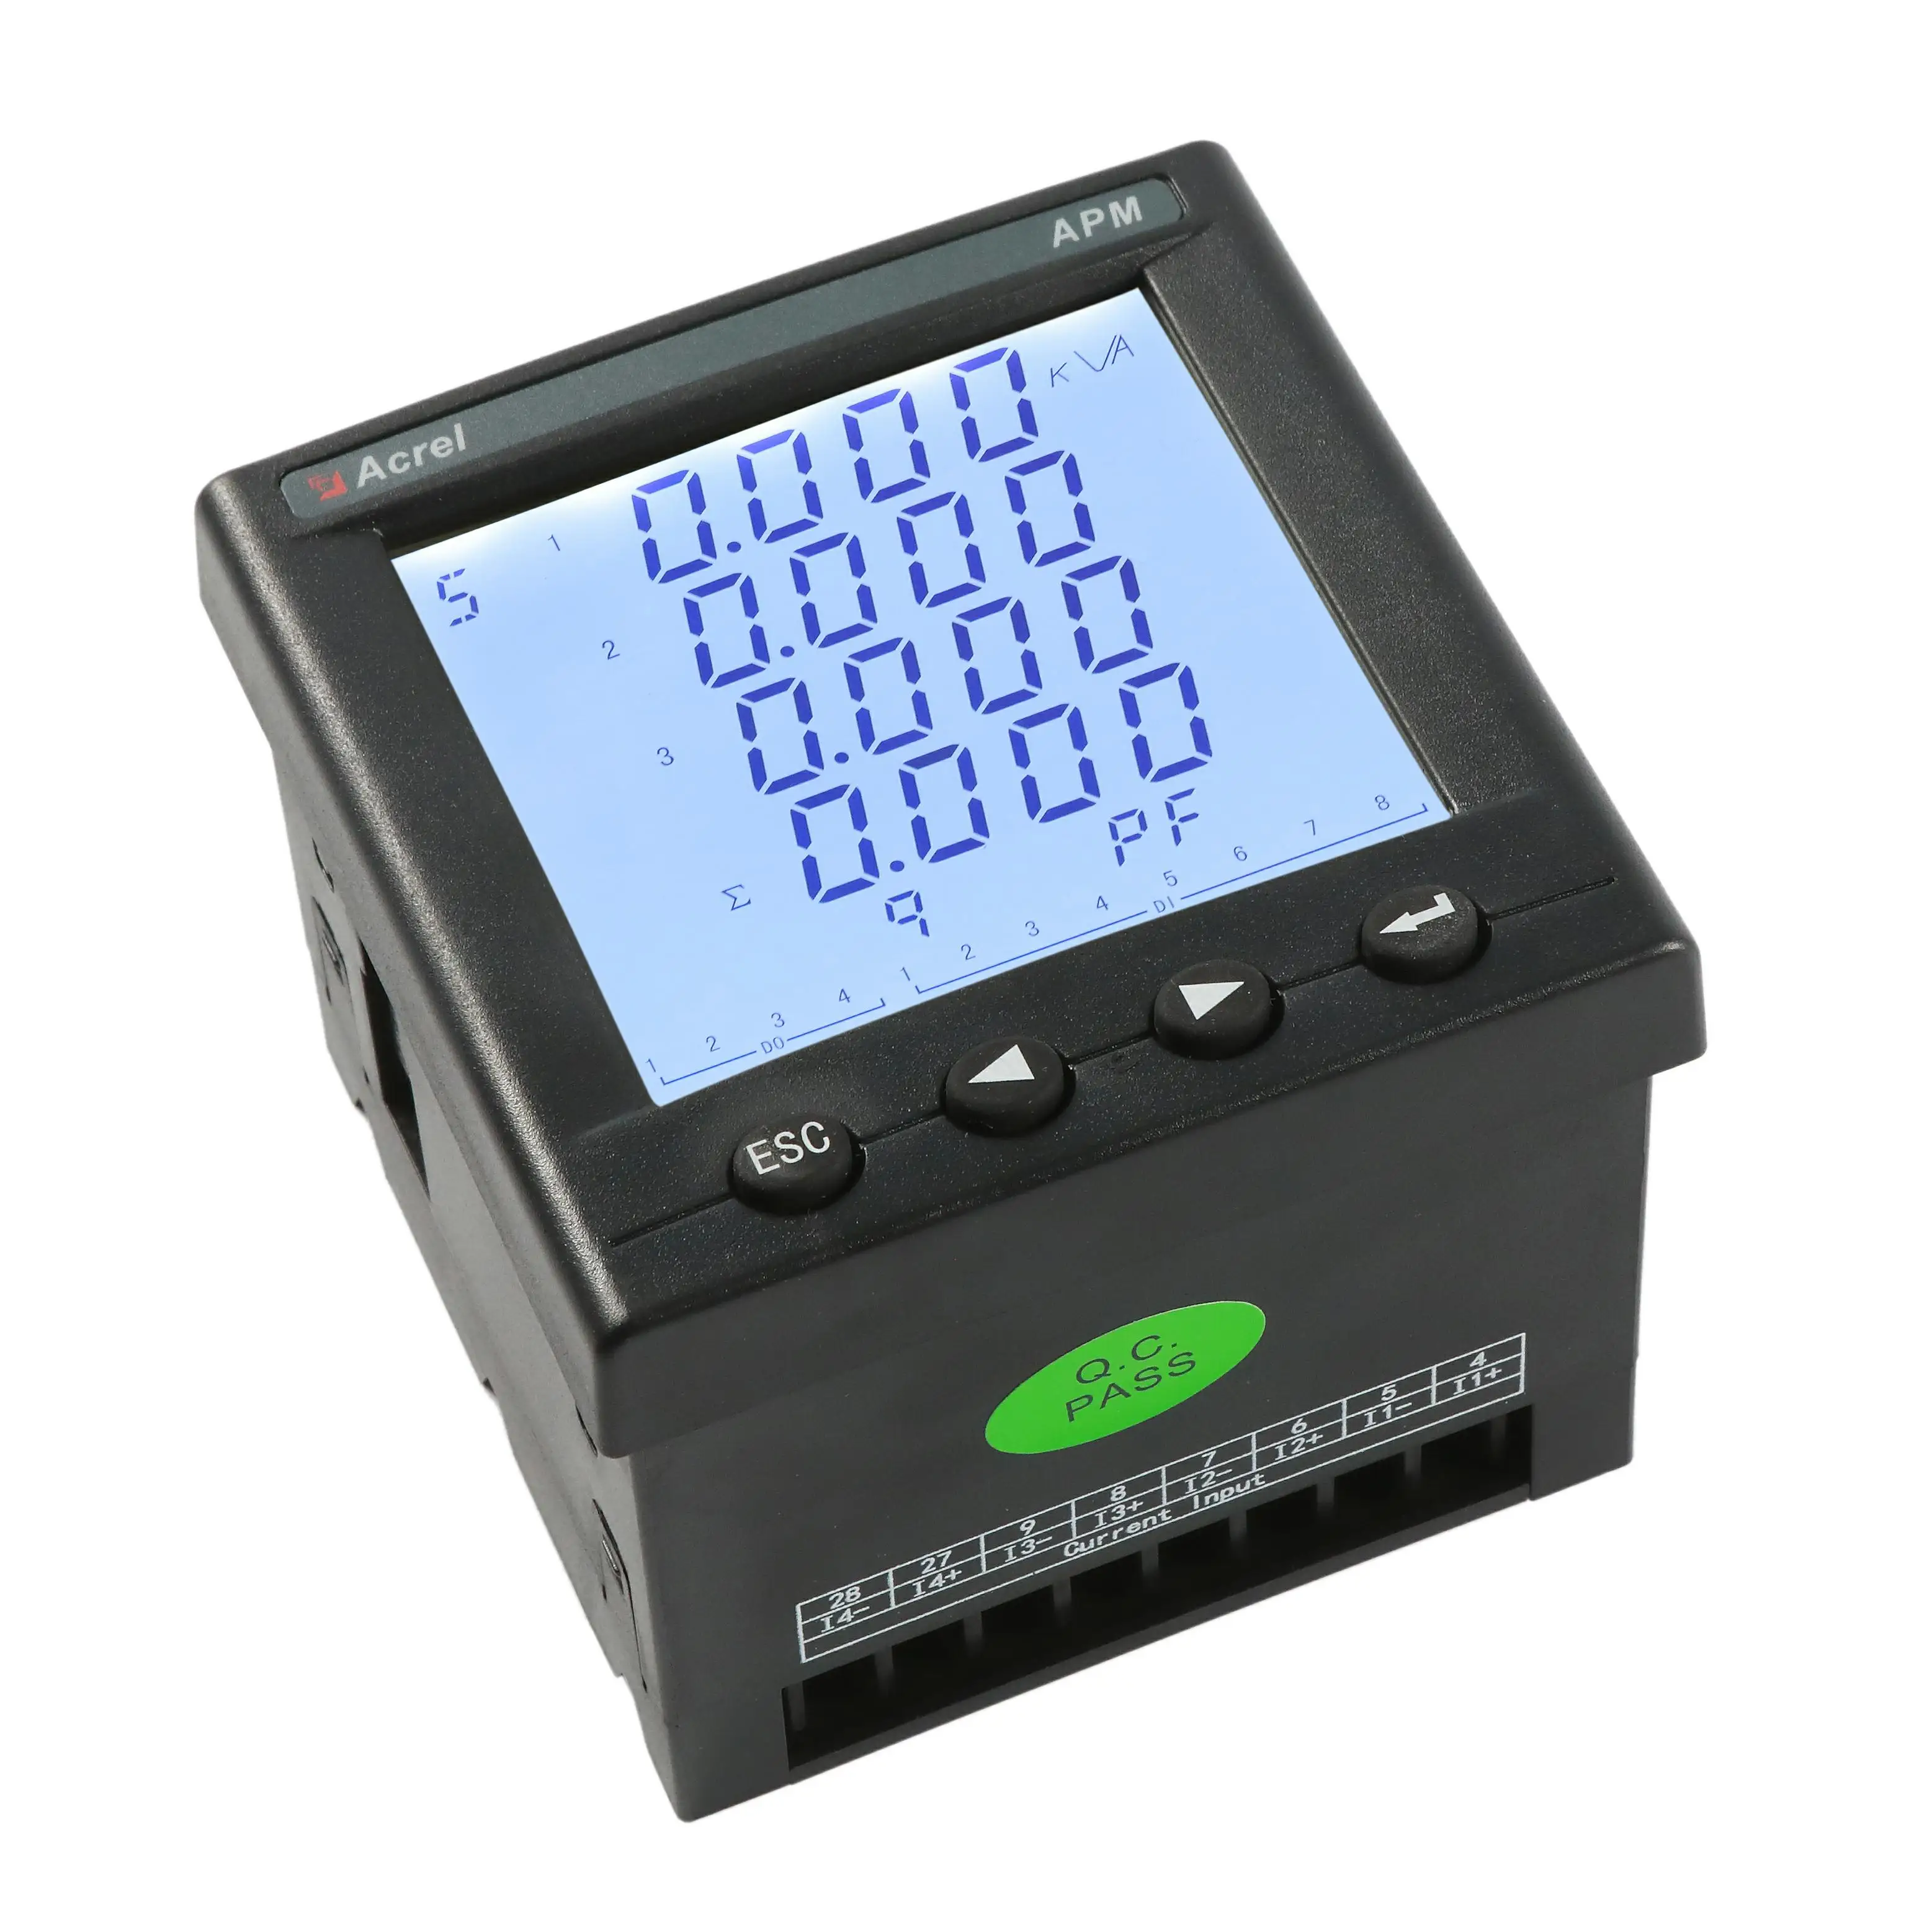 ACREL three phase smart power quality energy analyser meter APM800 high accuracy class 0.5S with RS485 Modbus